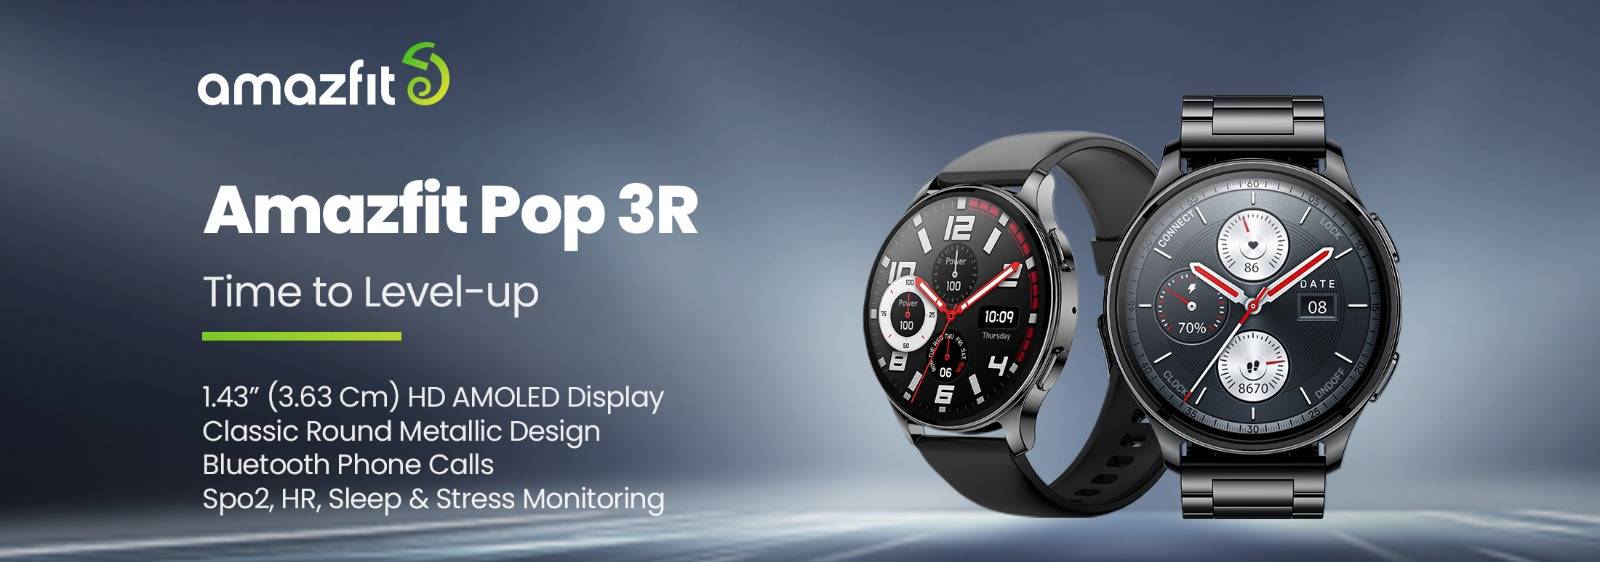 Amazfit Pop 2 Review – Budget Watch with AMOLED Screen, Bluetooth